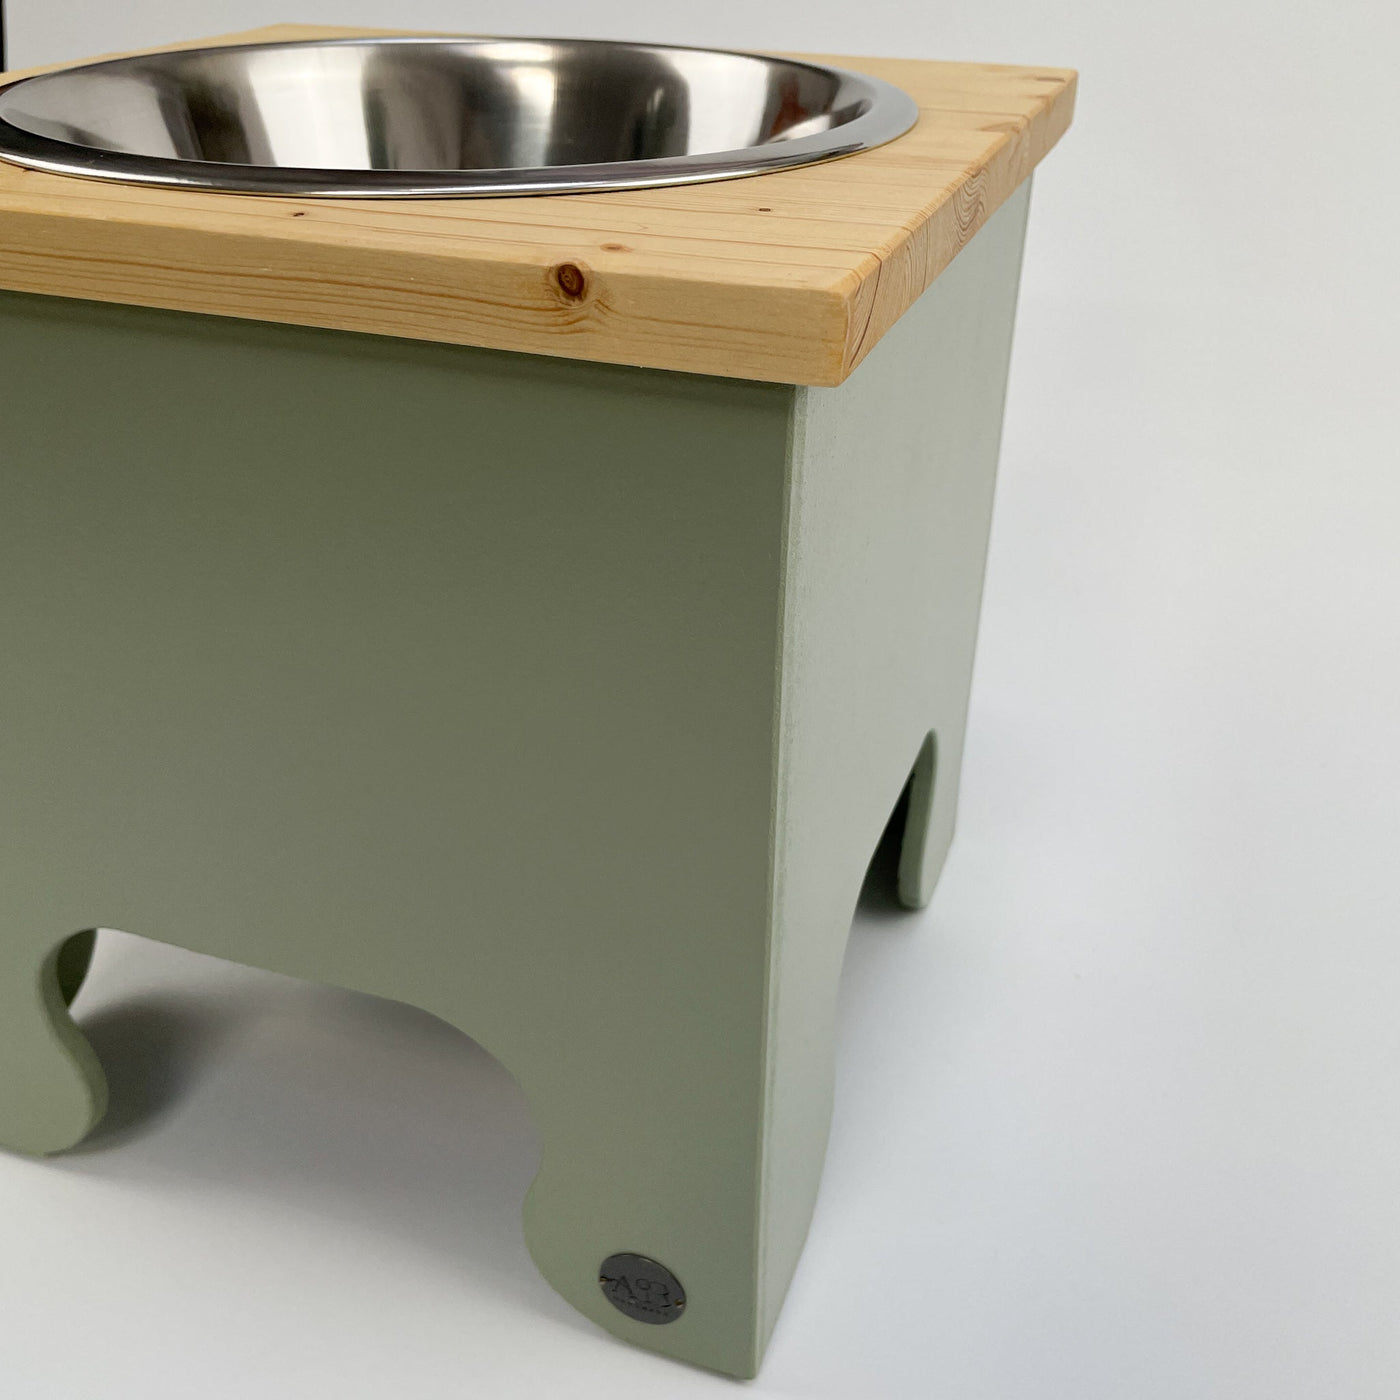 Extra Large Pine Top Raised Dog Bowl Feeding Stand in soft green.